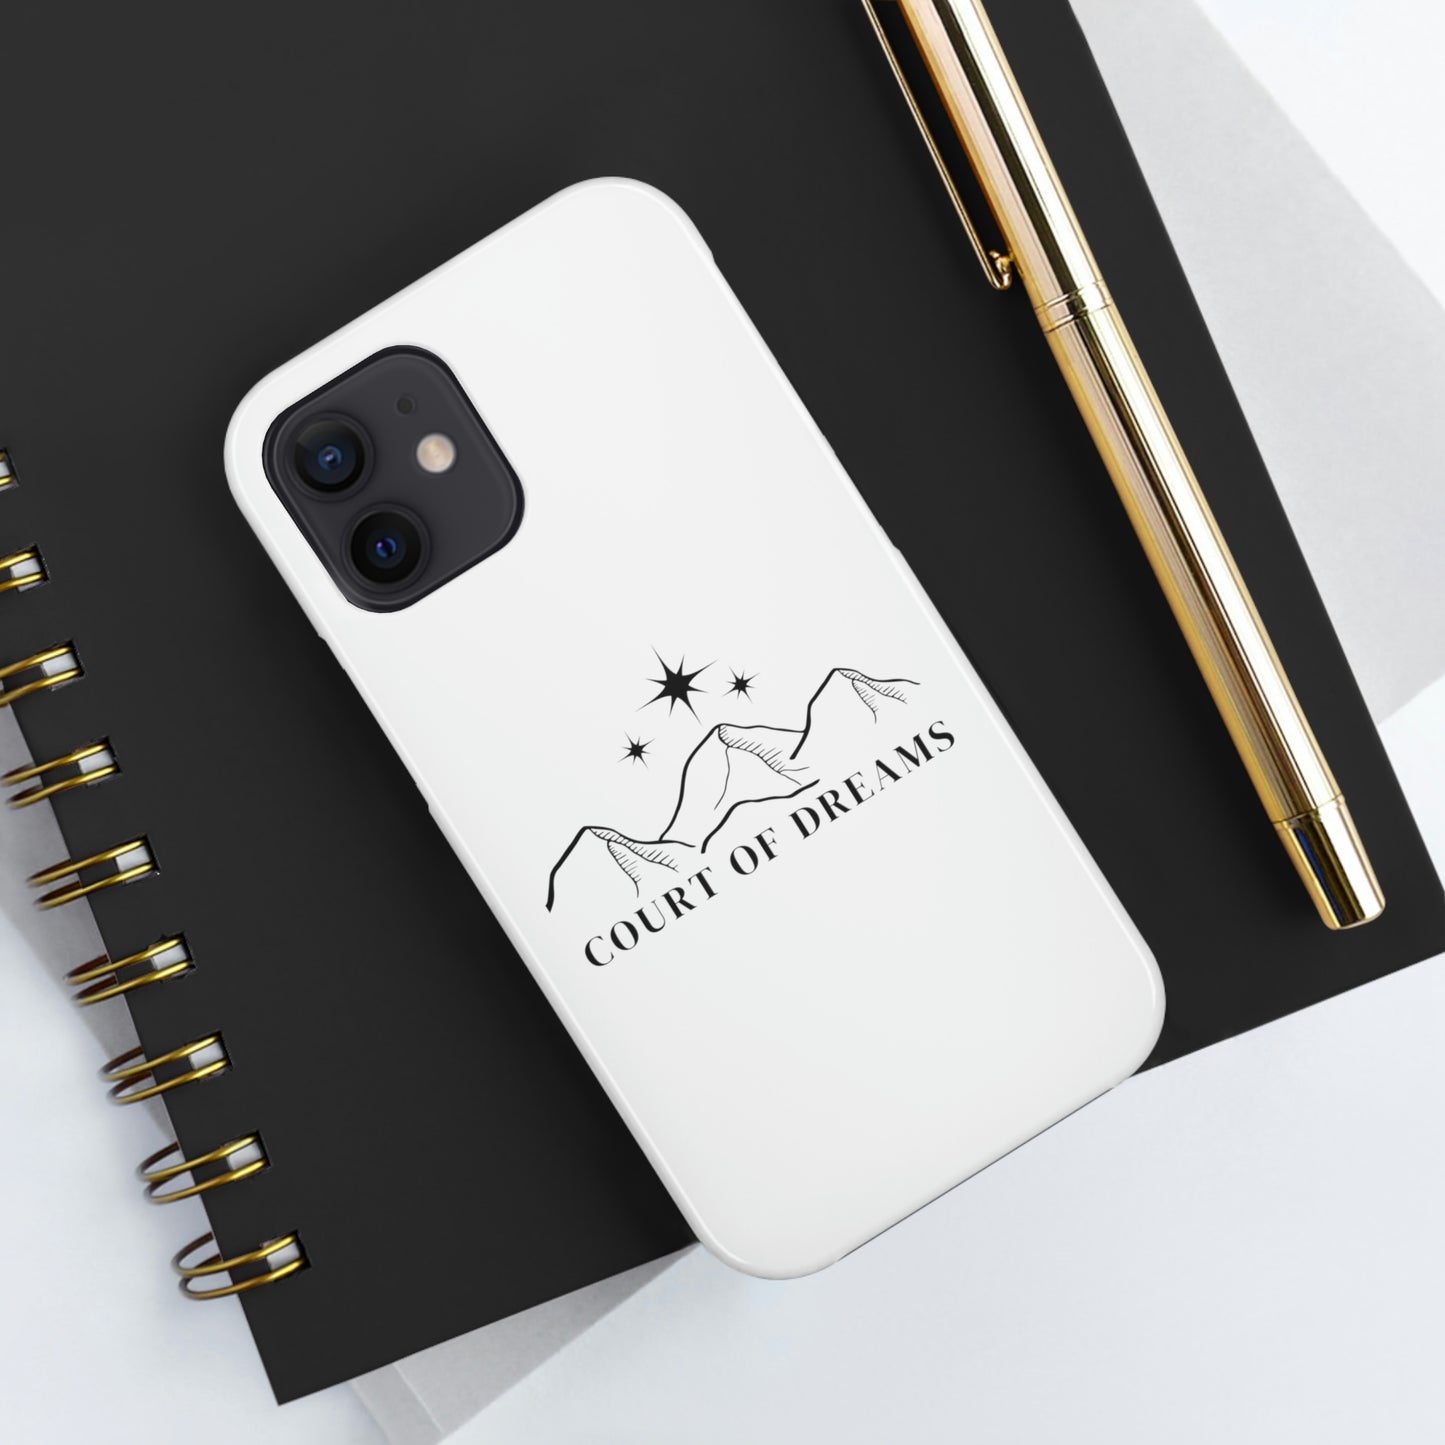 Court of Dreams Phone Case